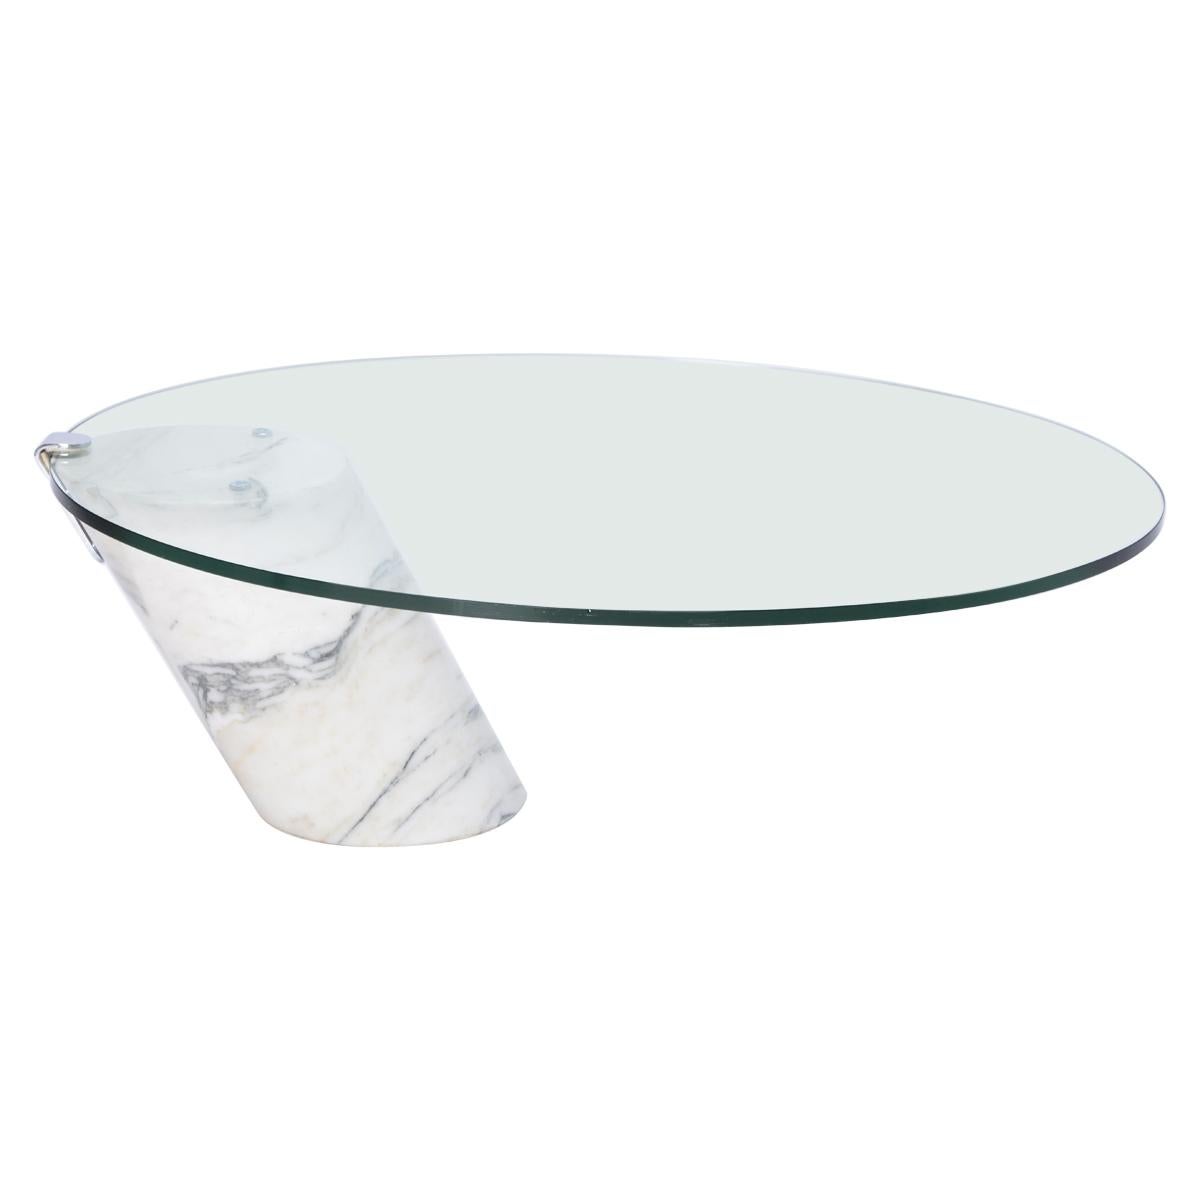 White Marble and Glass Coffee Table Model K1000 by Team Form for Ronald Schmitt